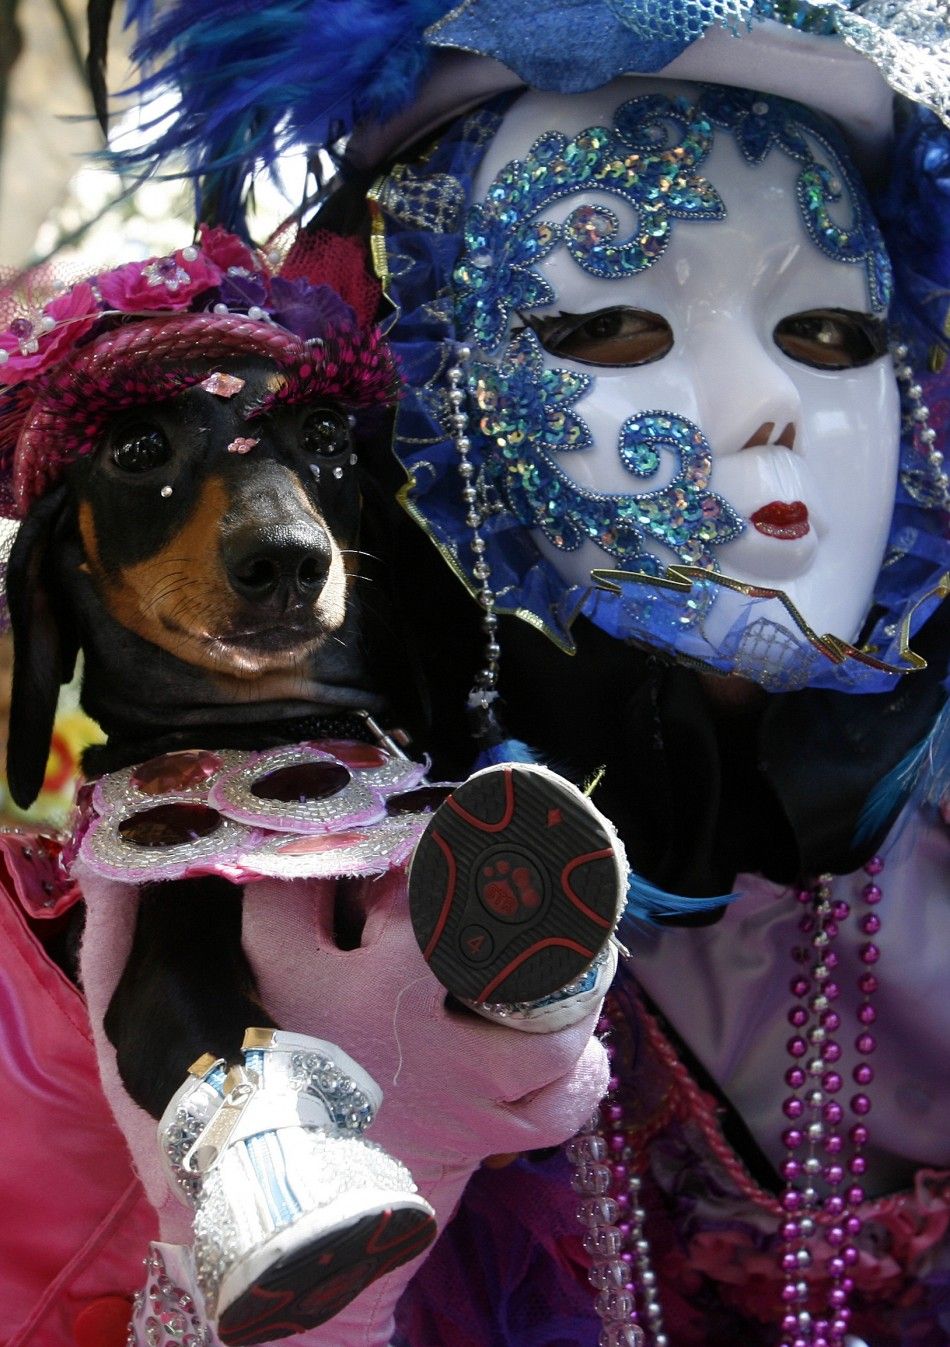 Accessorize your costume with your pet